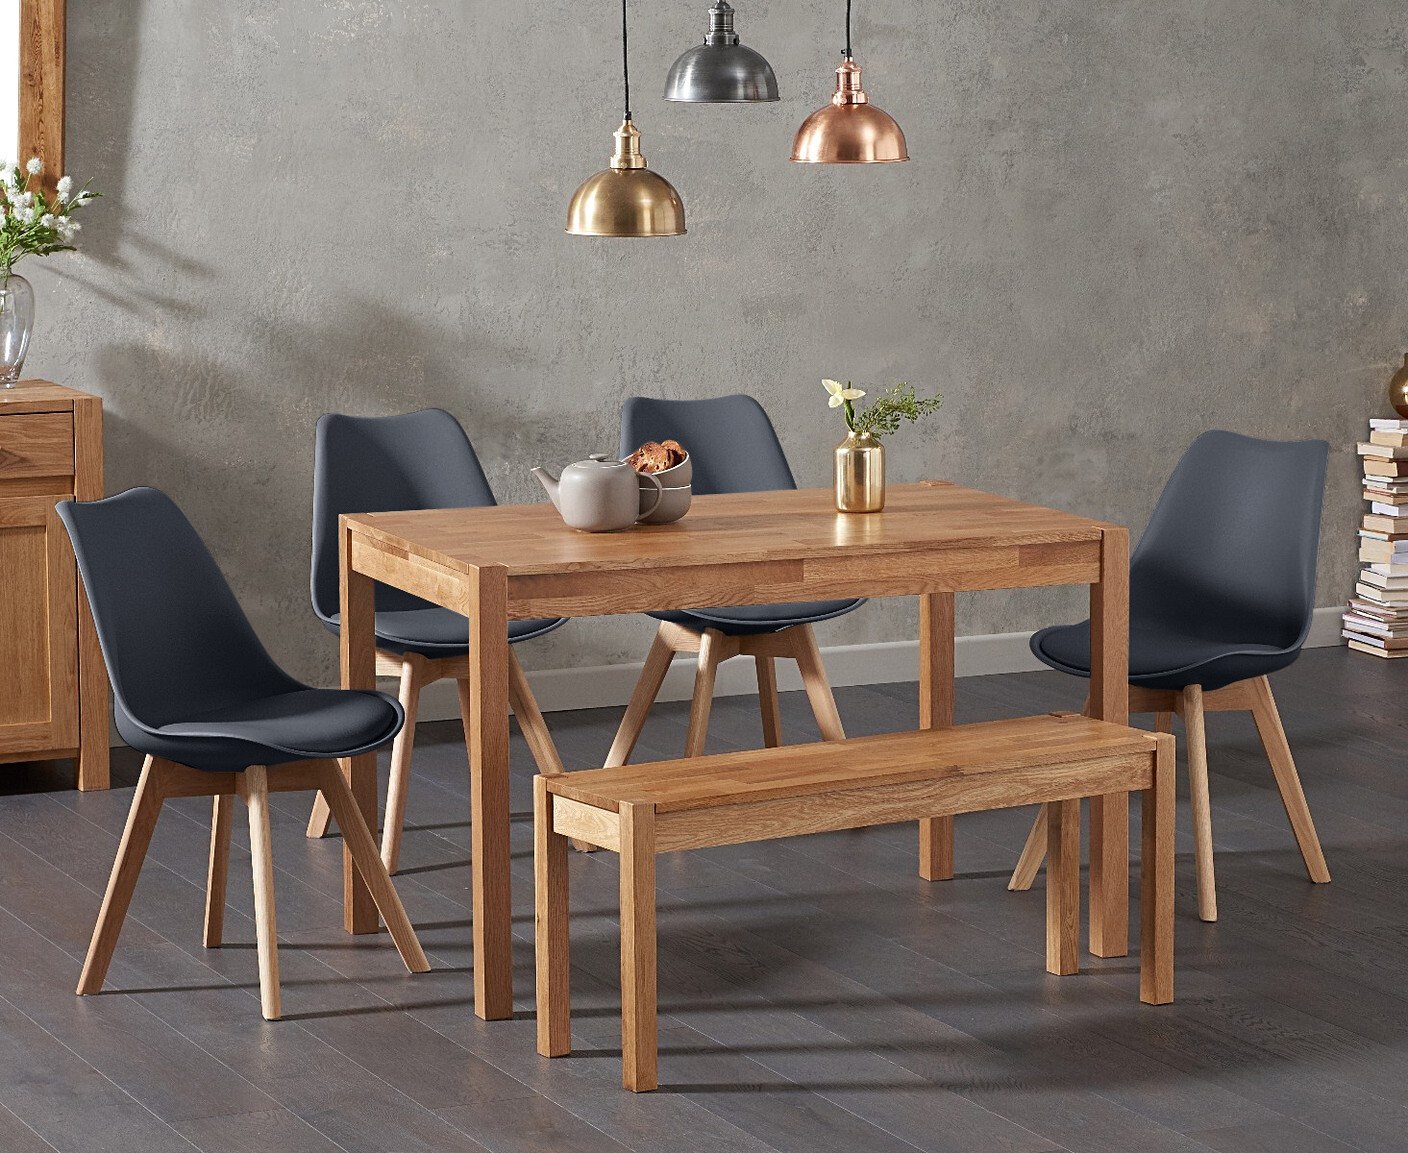 Photo 2 of York 150cm solid oak dining table with 4 dark grey orson chairs with 1 oak bench